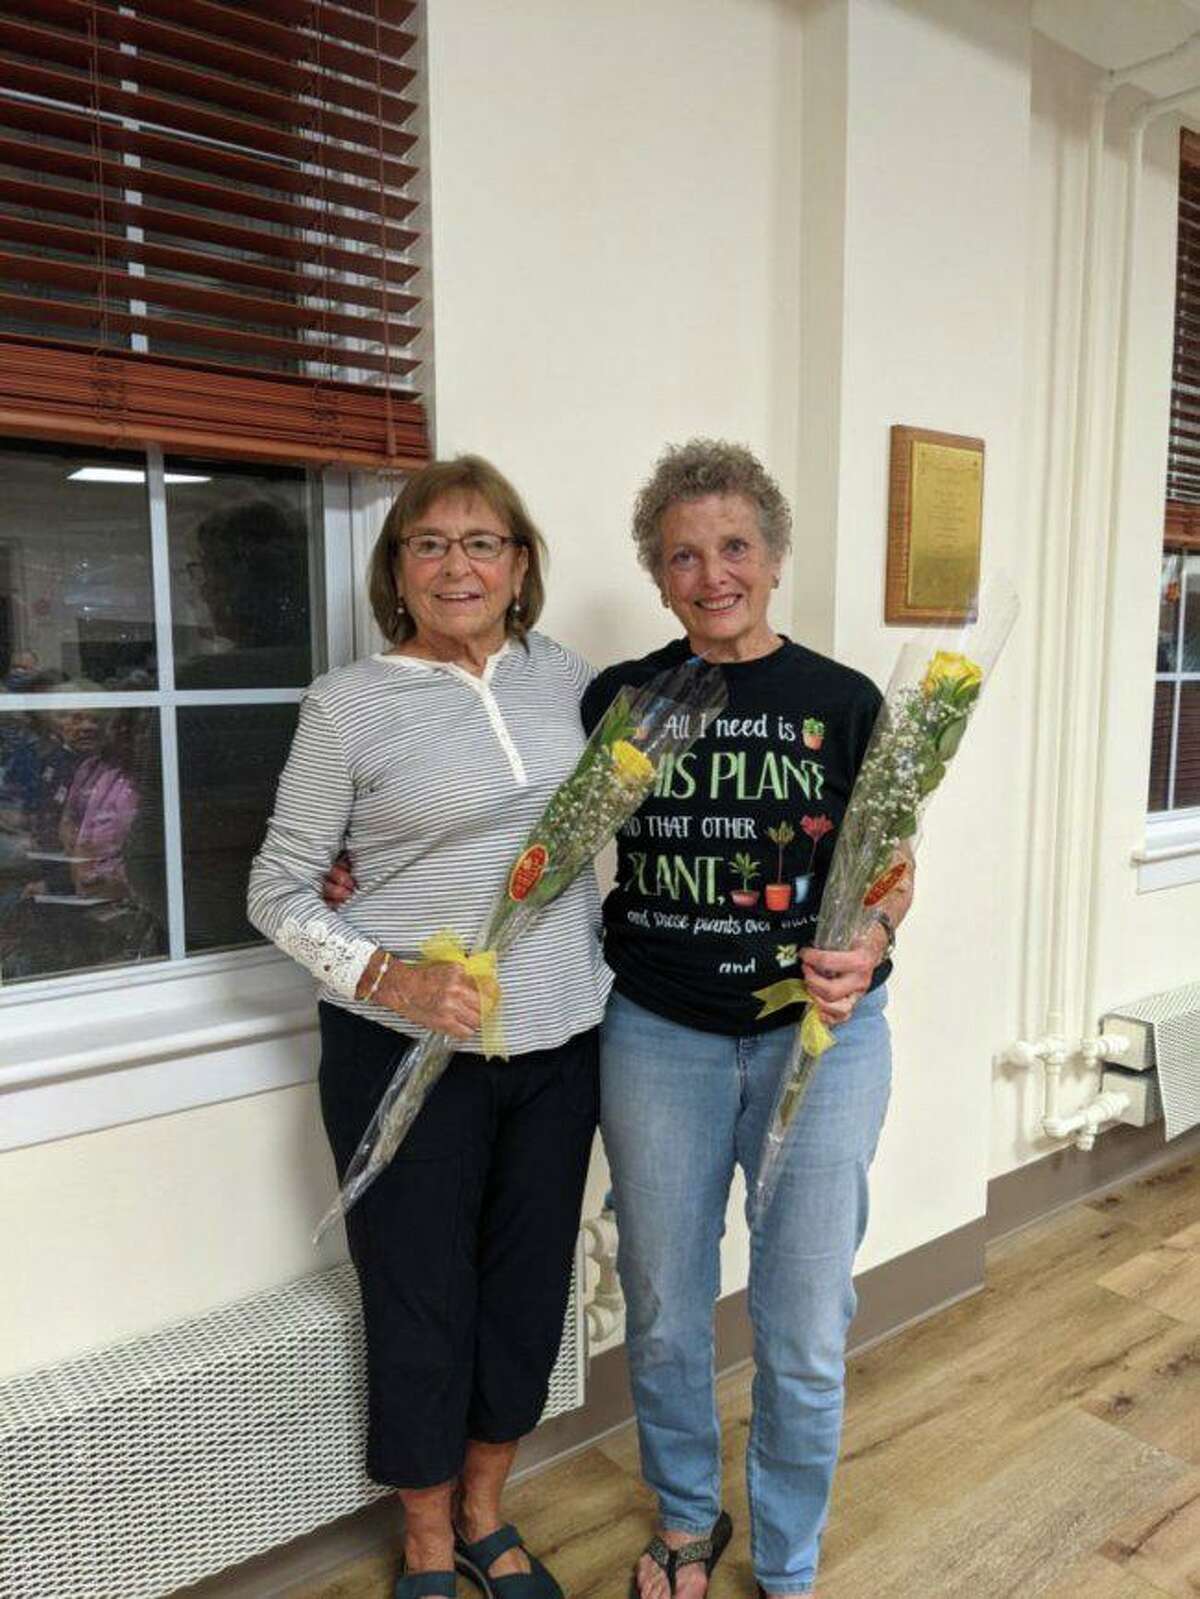 The North Haven Garden Club welcomed two new members before the start of its October program: Wini Colleran and Betty Ann Rider. Both said they are ready to join in and help with many of the activities the club has planned for the upcoming year.